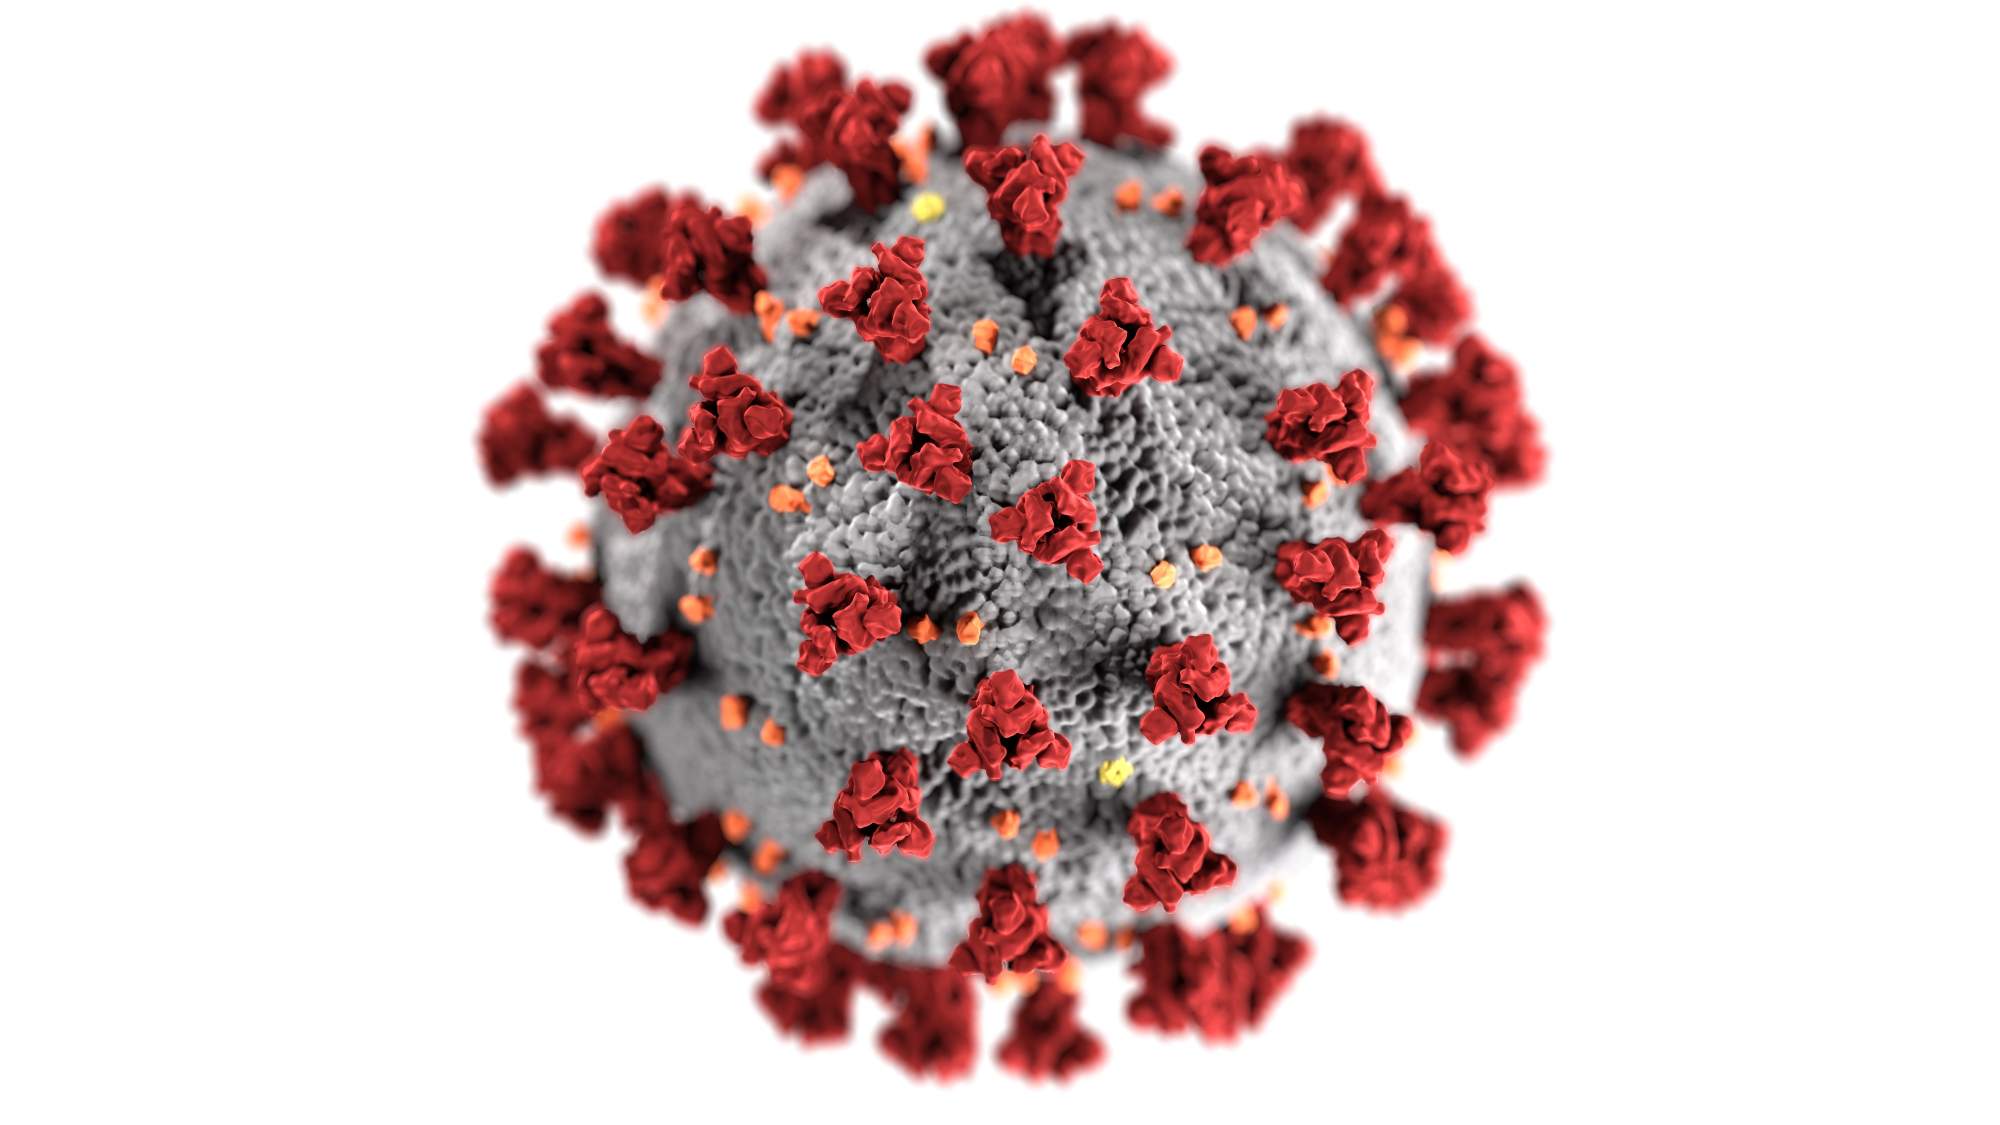 The Potential Effects Of COVID-19 Virus